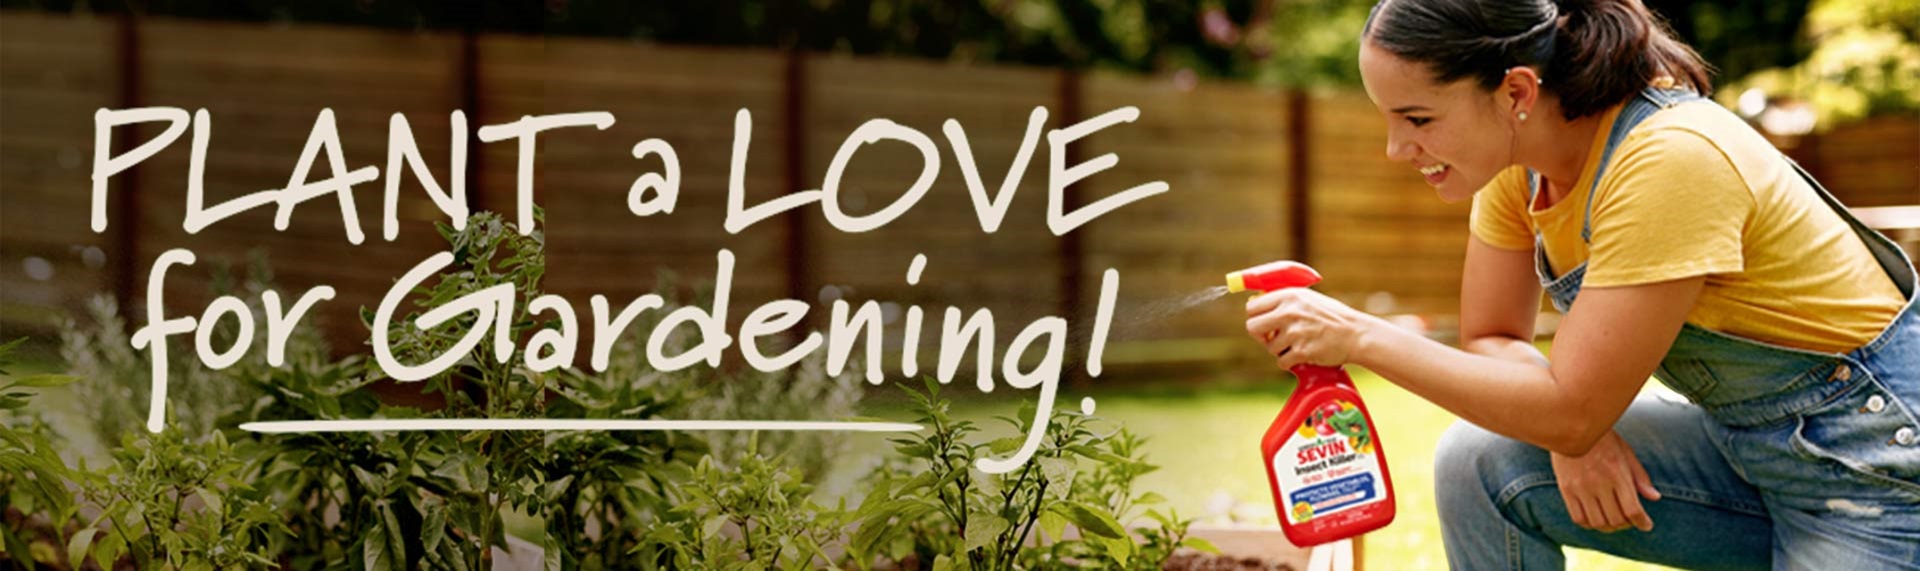 Plant a love for gardening